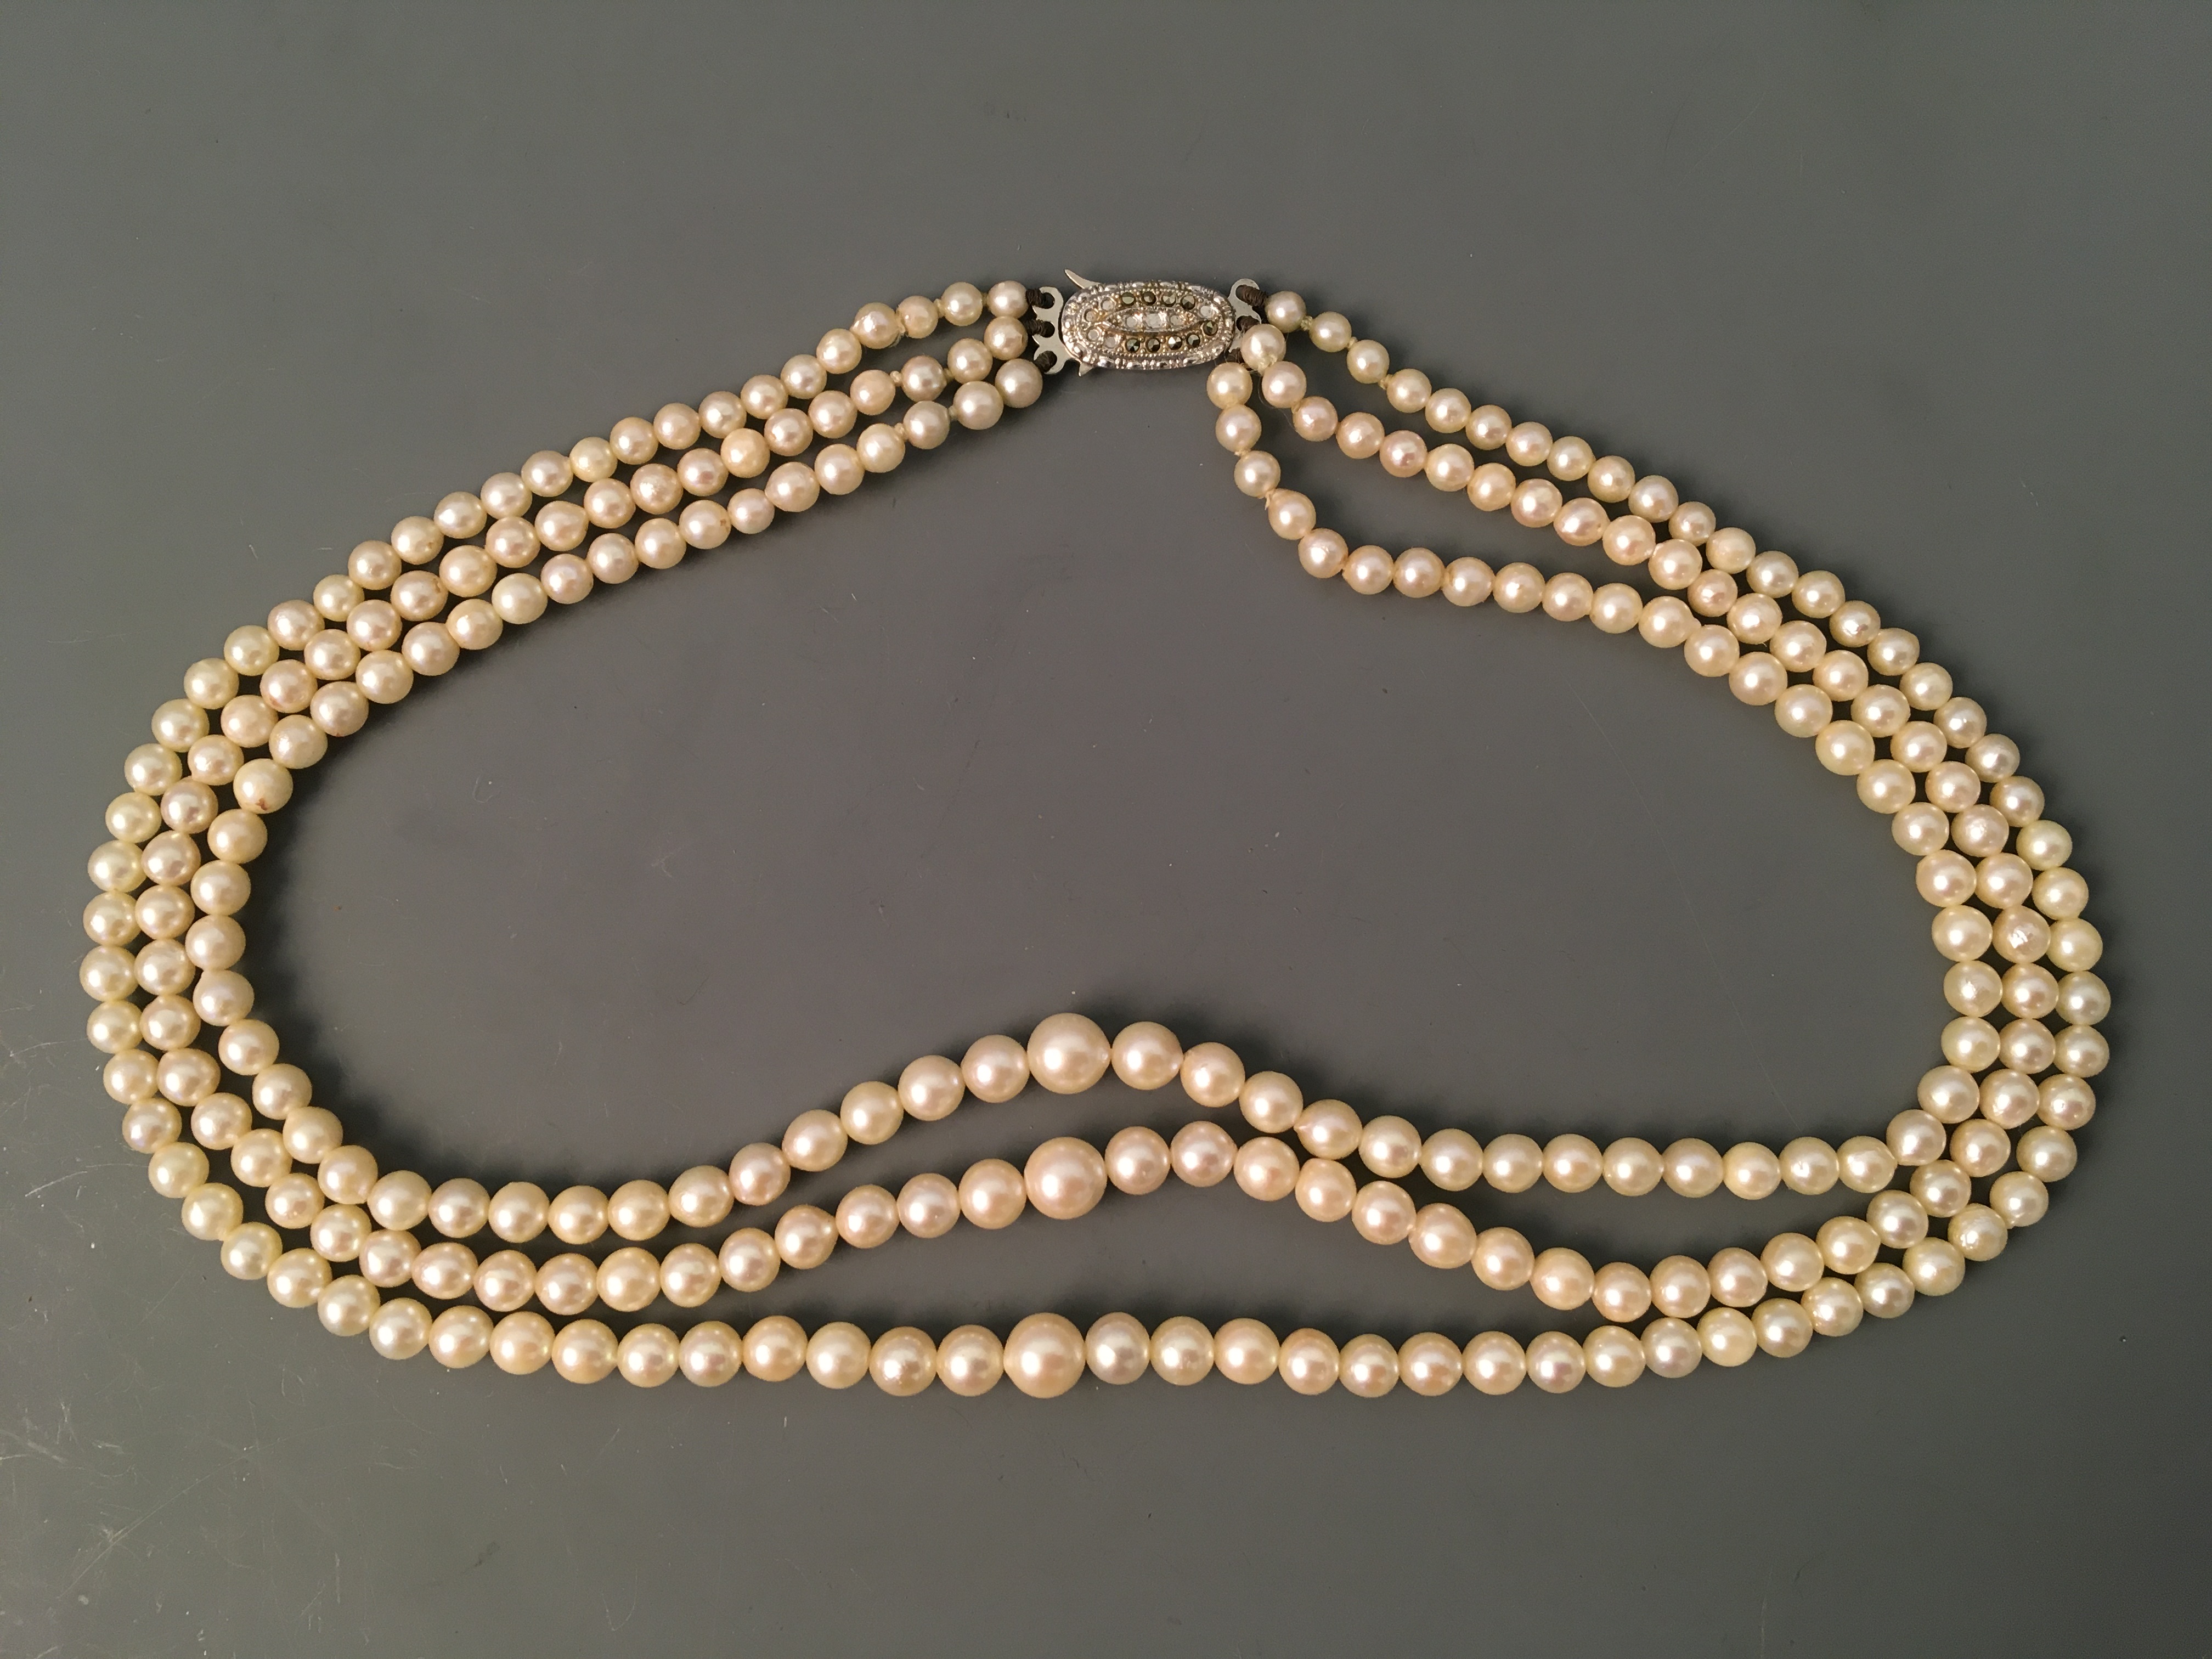 A three row string of pearls, 'Ledawn' with gem stone clasp marked sterling silver. IMPORTANT: